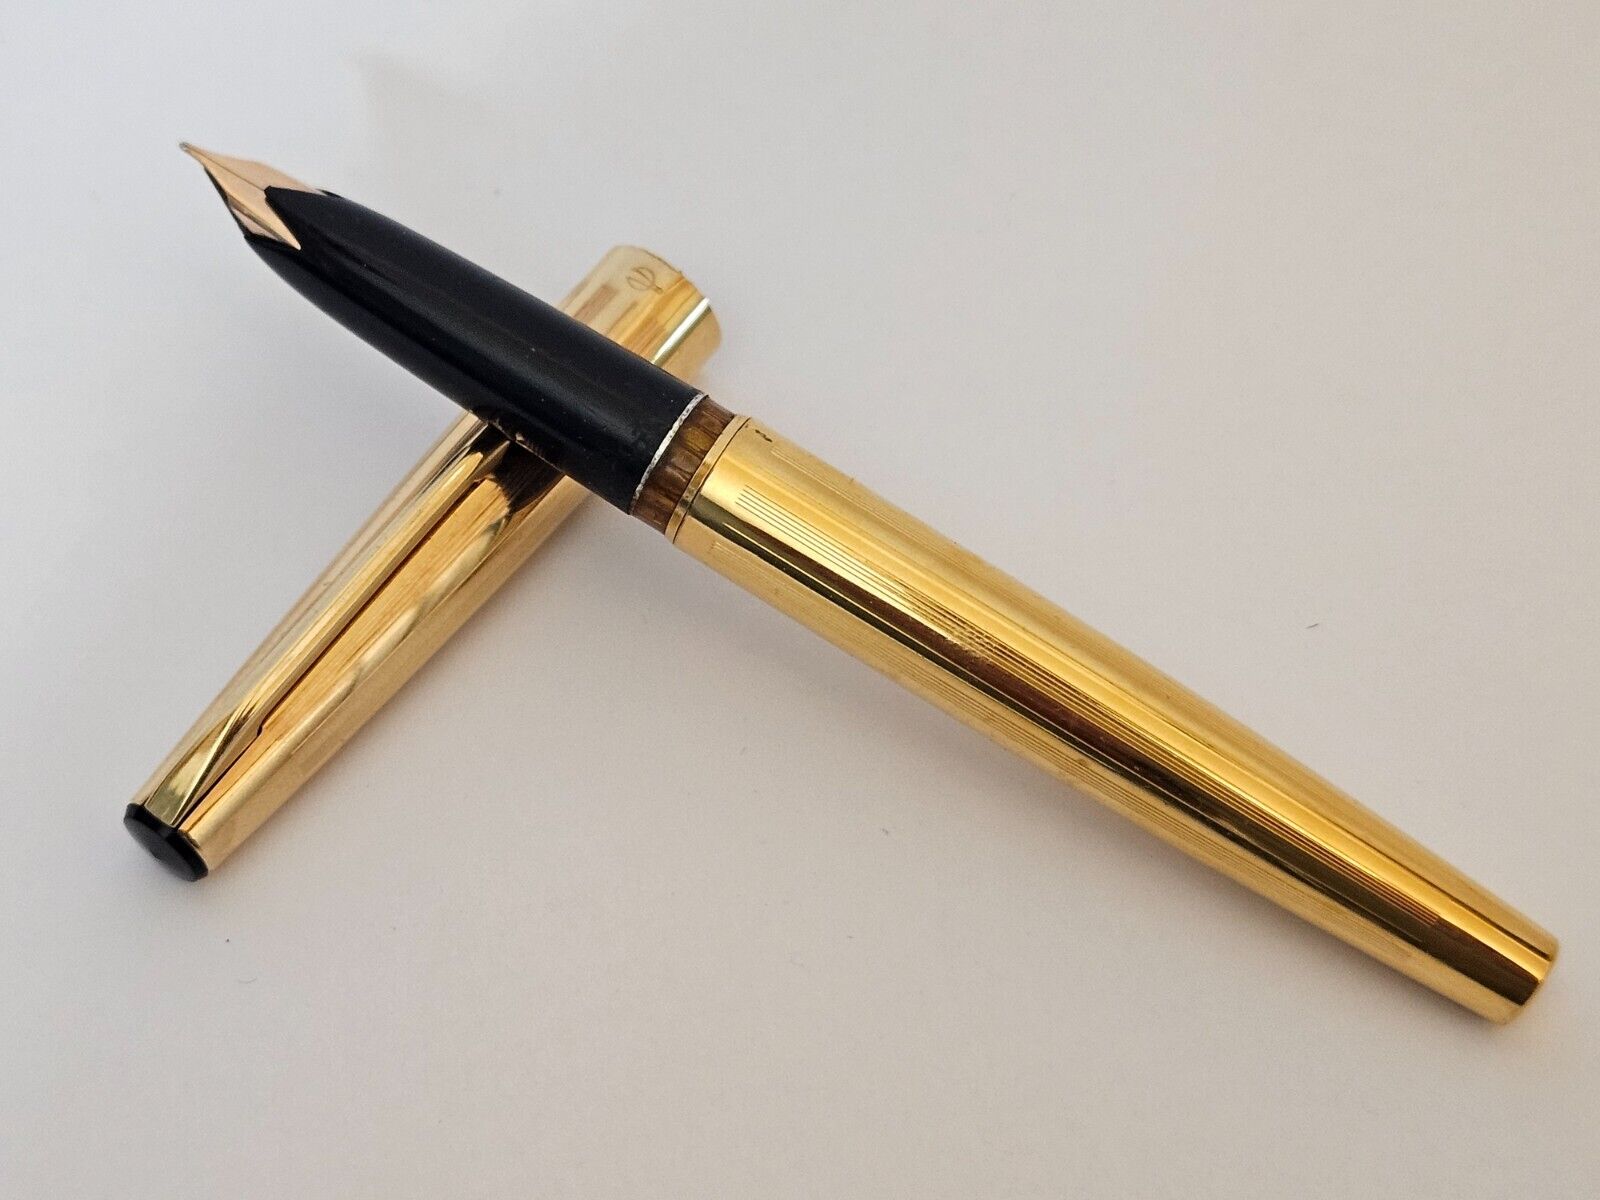 VINTAGE FOUNTAIN PEN 14k GOLD NIB 583 GOLD PLATED BODY MADE IN USSR RARE (BK174